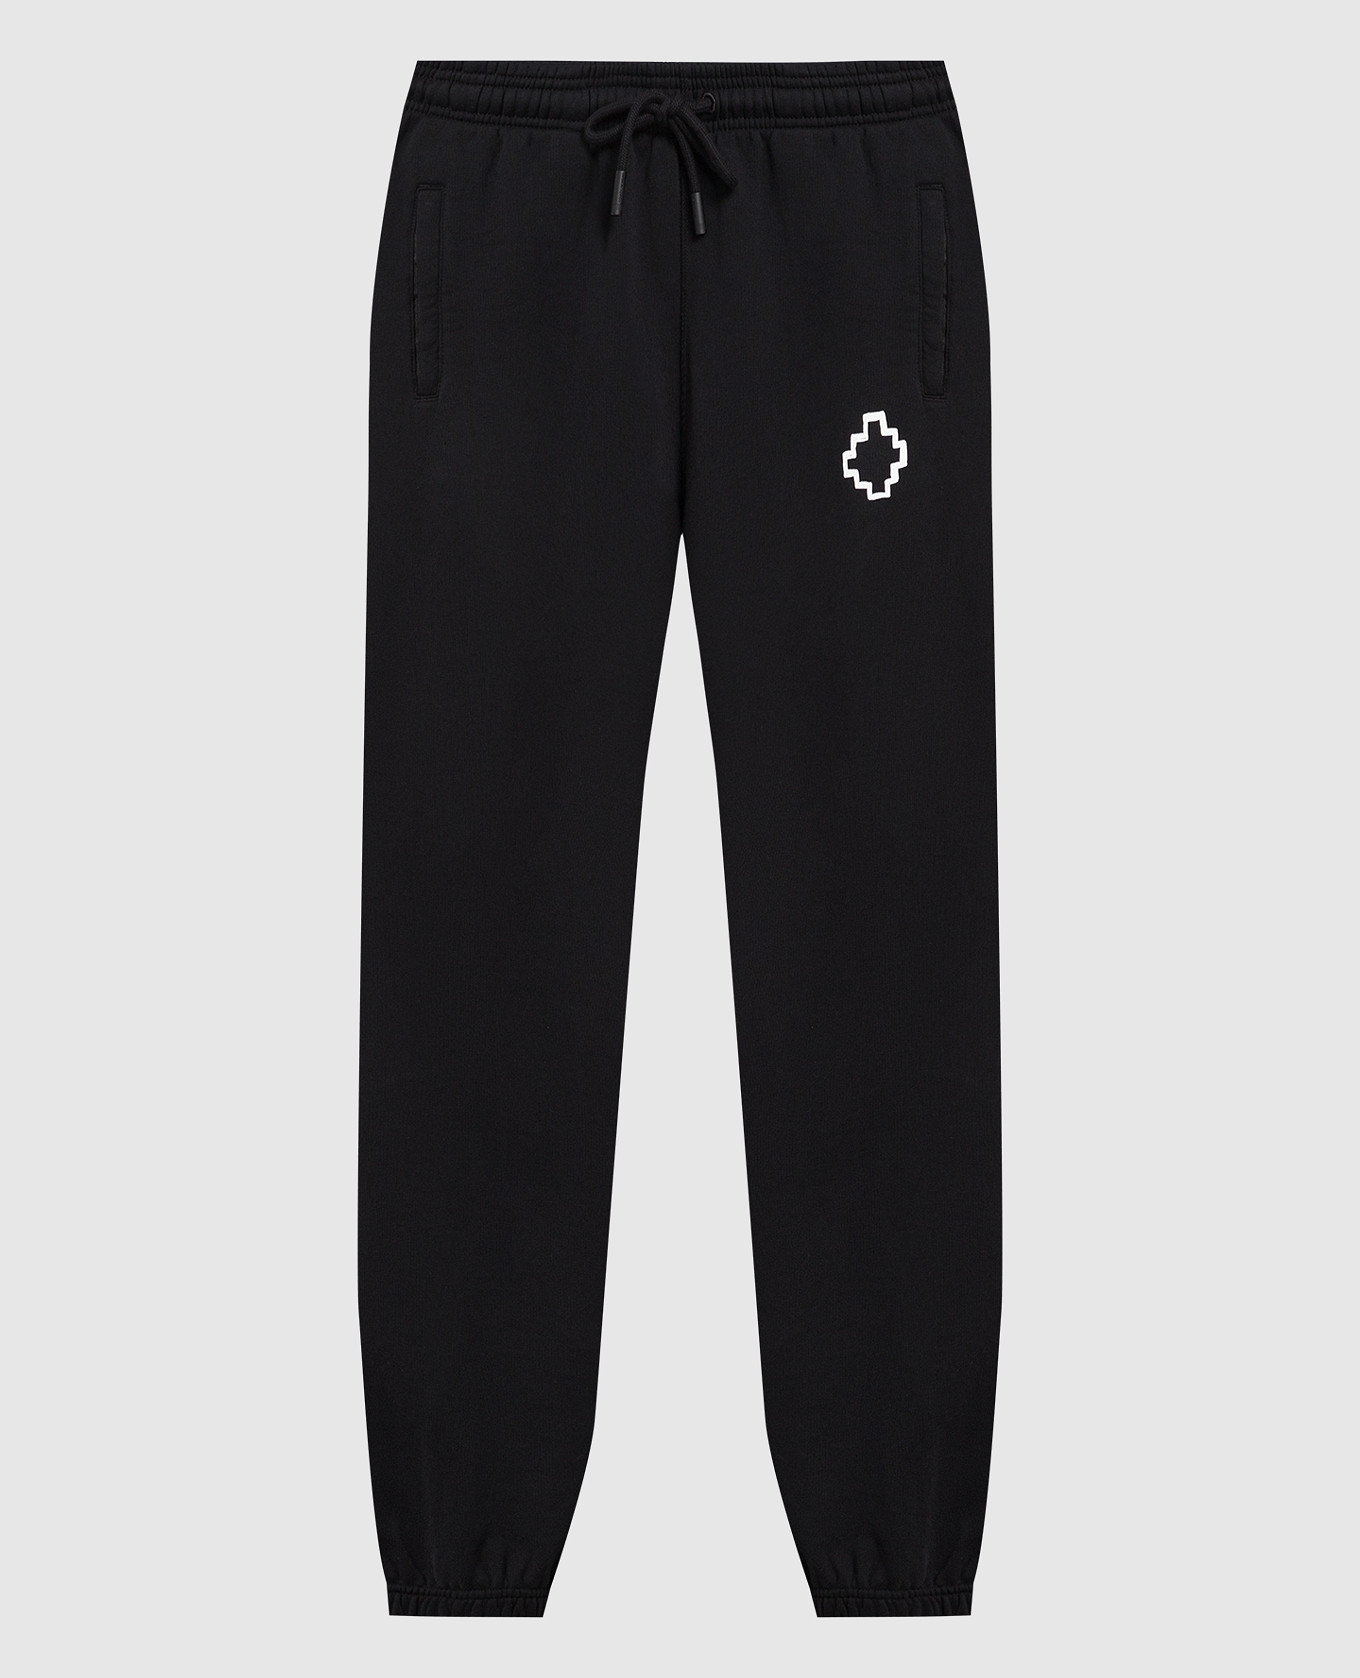 Black TEMPERA CROSS RELAX joggers with contrasting logo